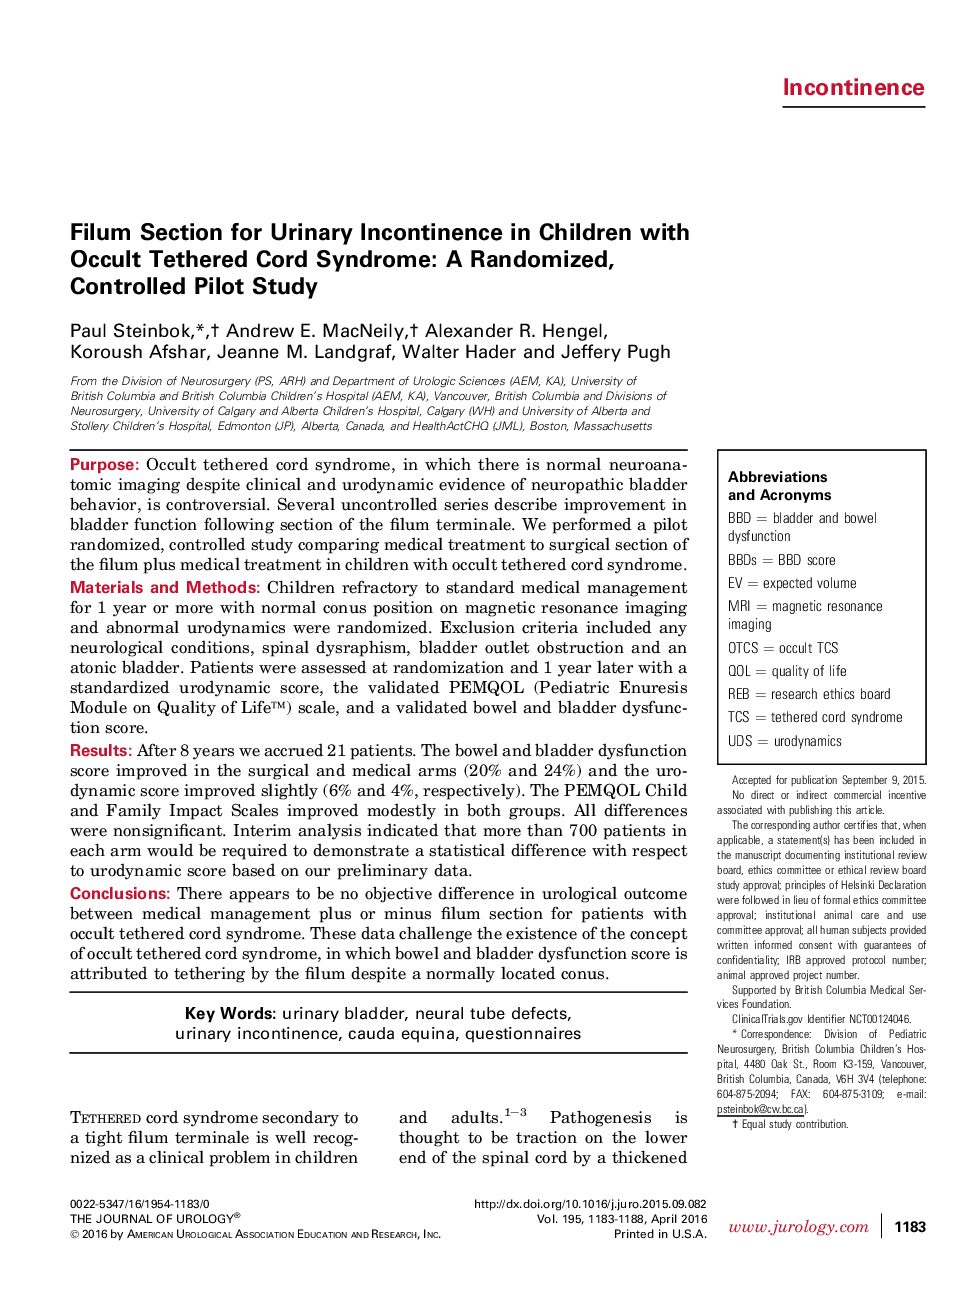 Filum Section for Urinary Incontinence in Children with Occult Tethered Cord Syndrome: A Randomized, Controlled Pilot Study 